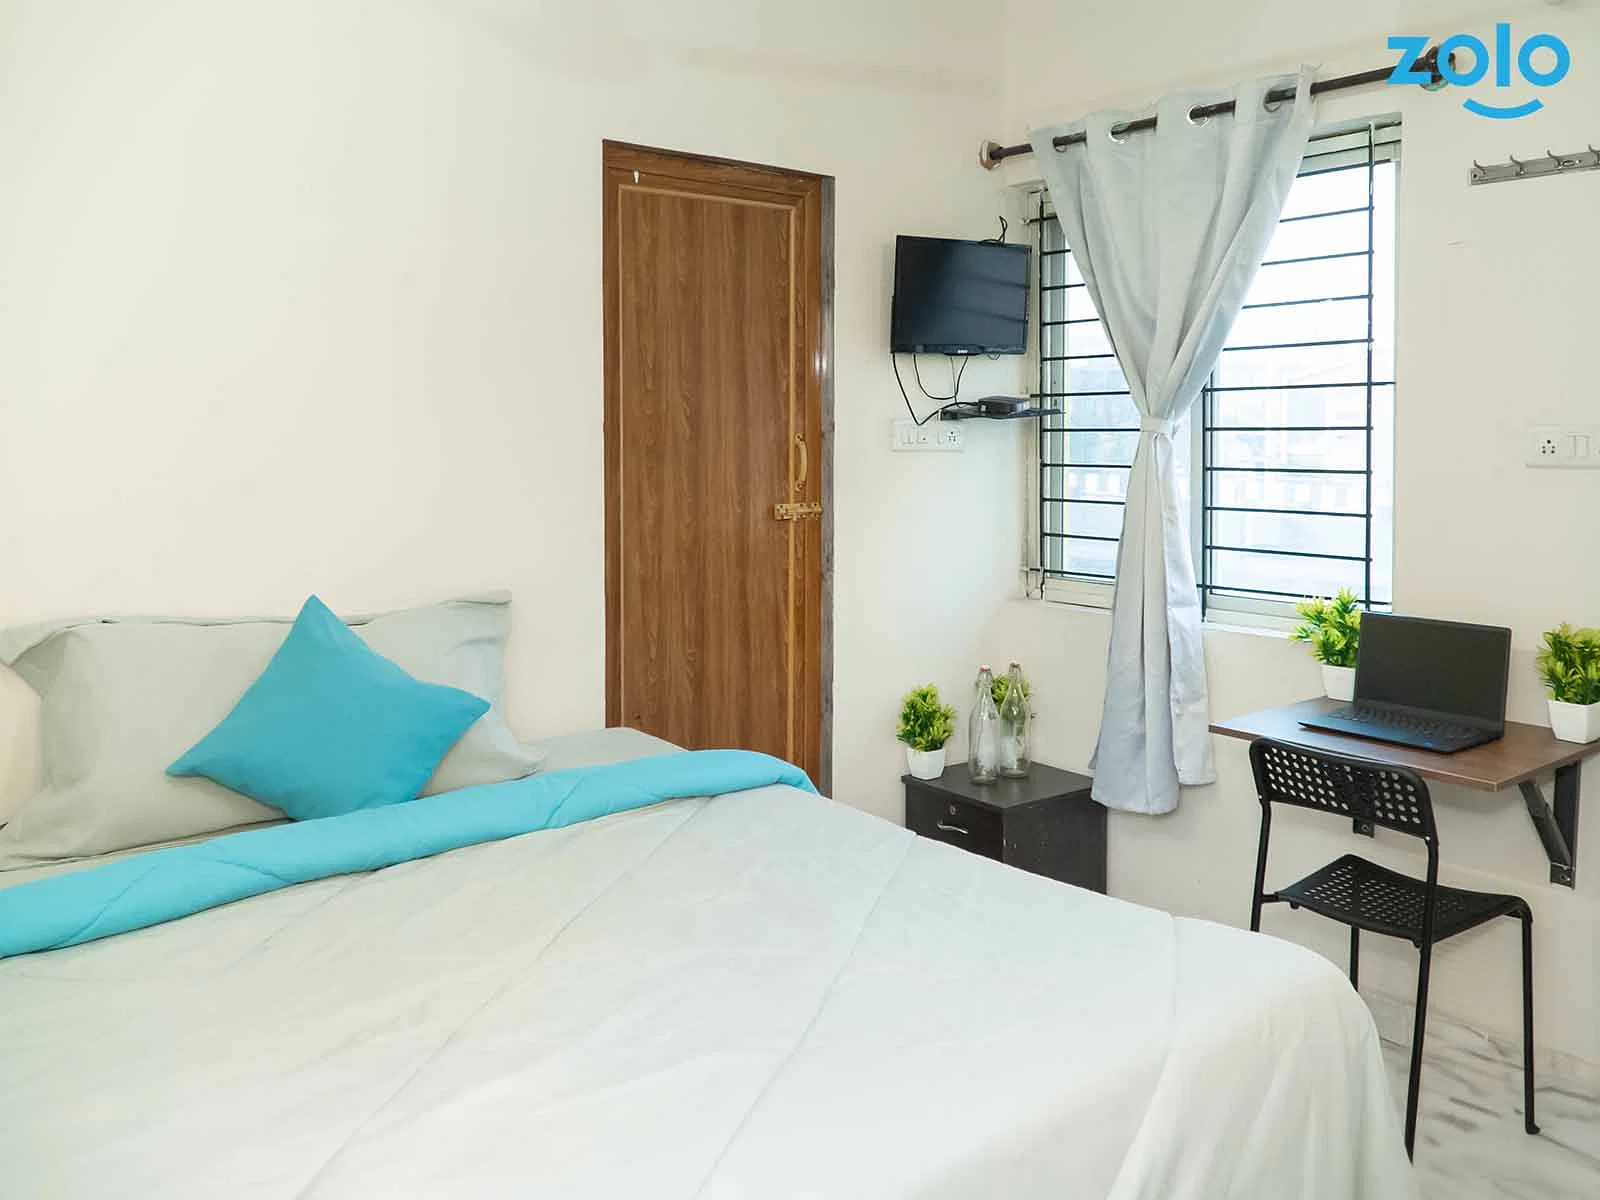 fully furnished Zolo single rooms for rent near me-check out now-Zolo Sphere